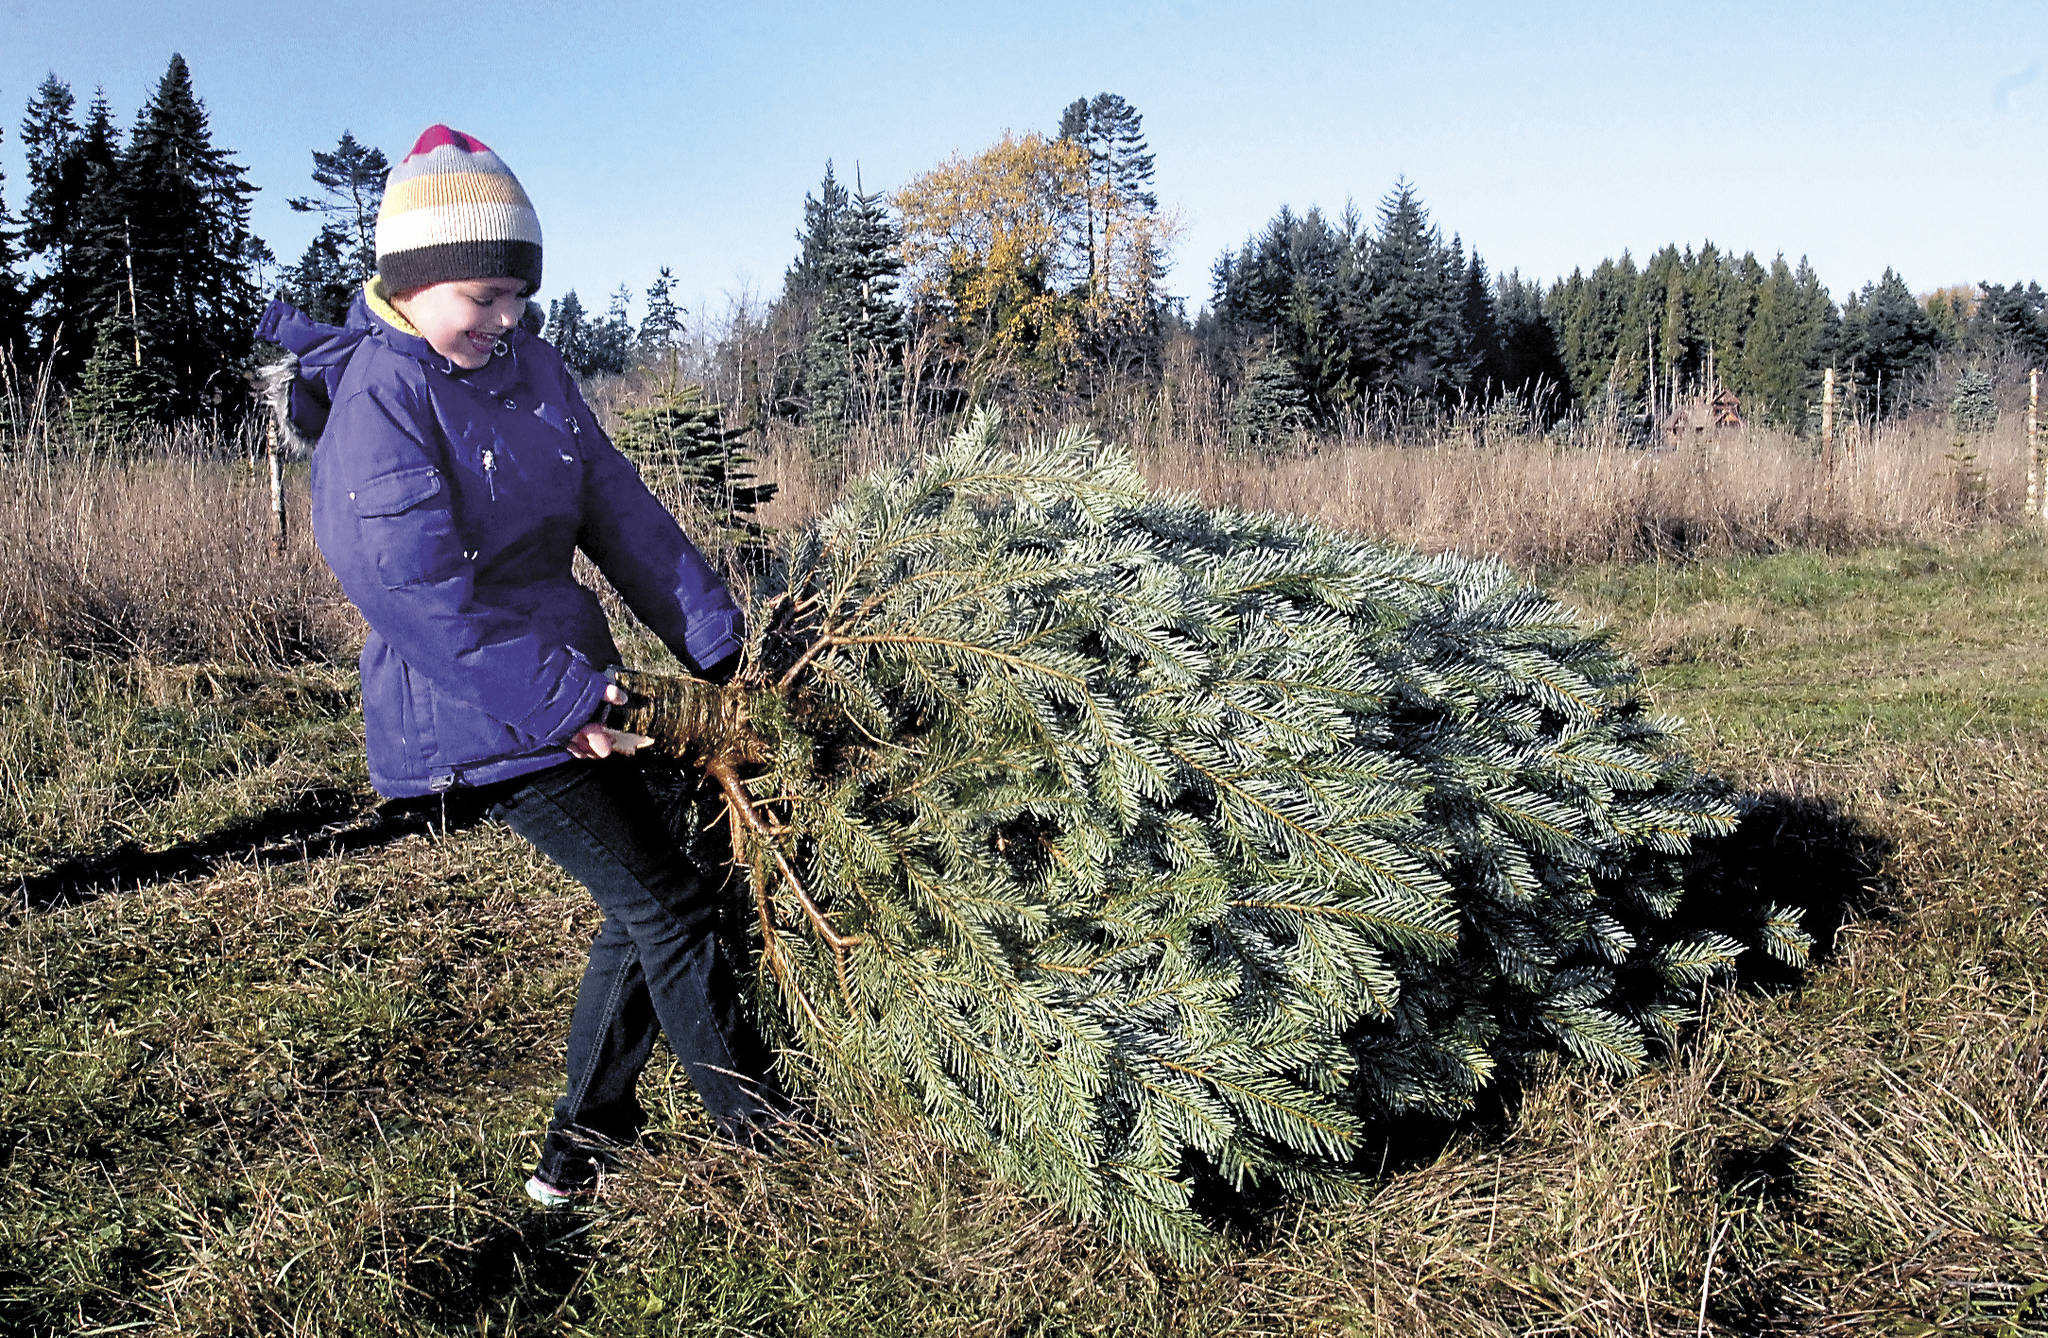 Keith Thorpe | Peninsula Daily News                                Shaylin Lowe, 8, of Port Angeles drags a freshly cut tree back to the family car as part of an outing to cut their own Christmas tree at Lazy J Tree Farm east of Port Angeles.